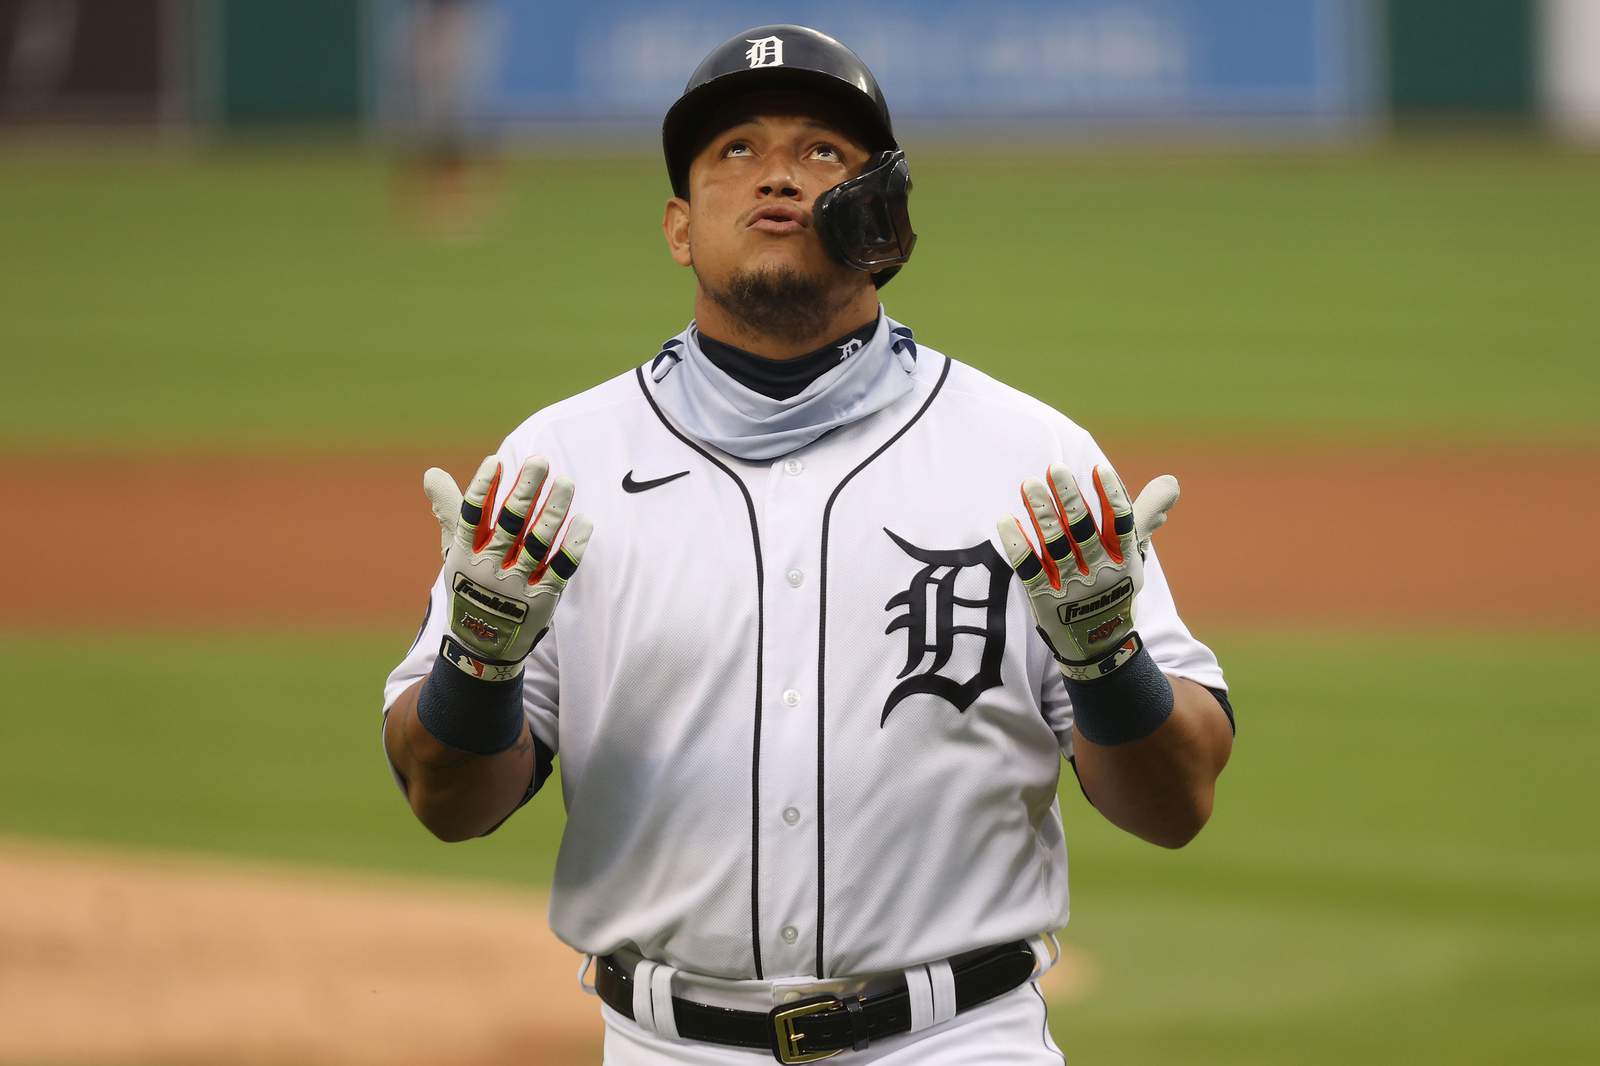 After surprising start, Detroit Tigers quickly fading from playoff picture